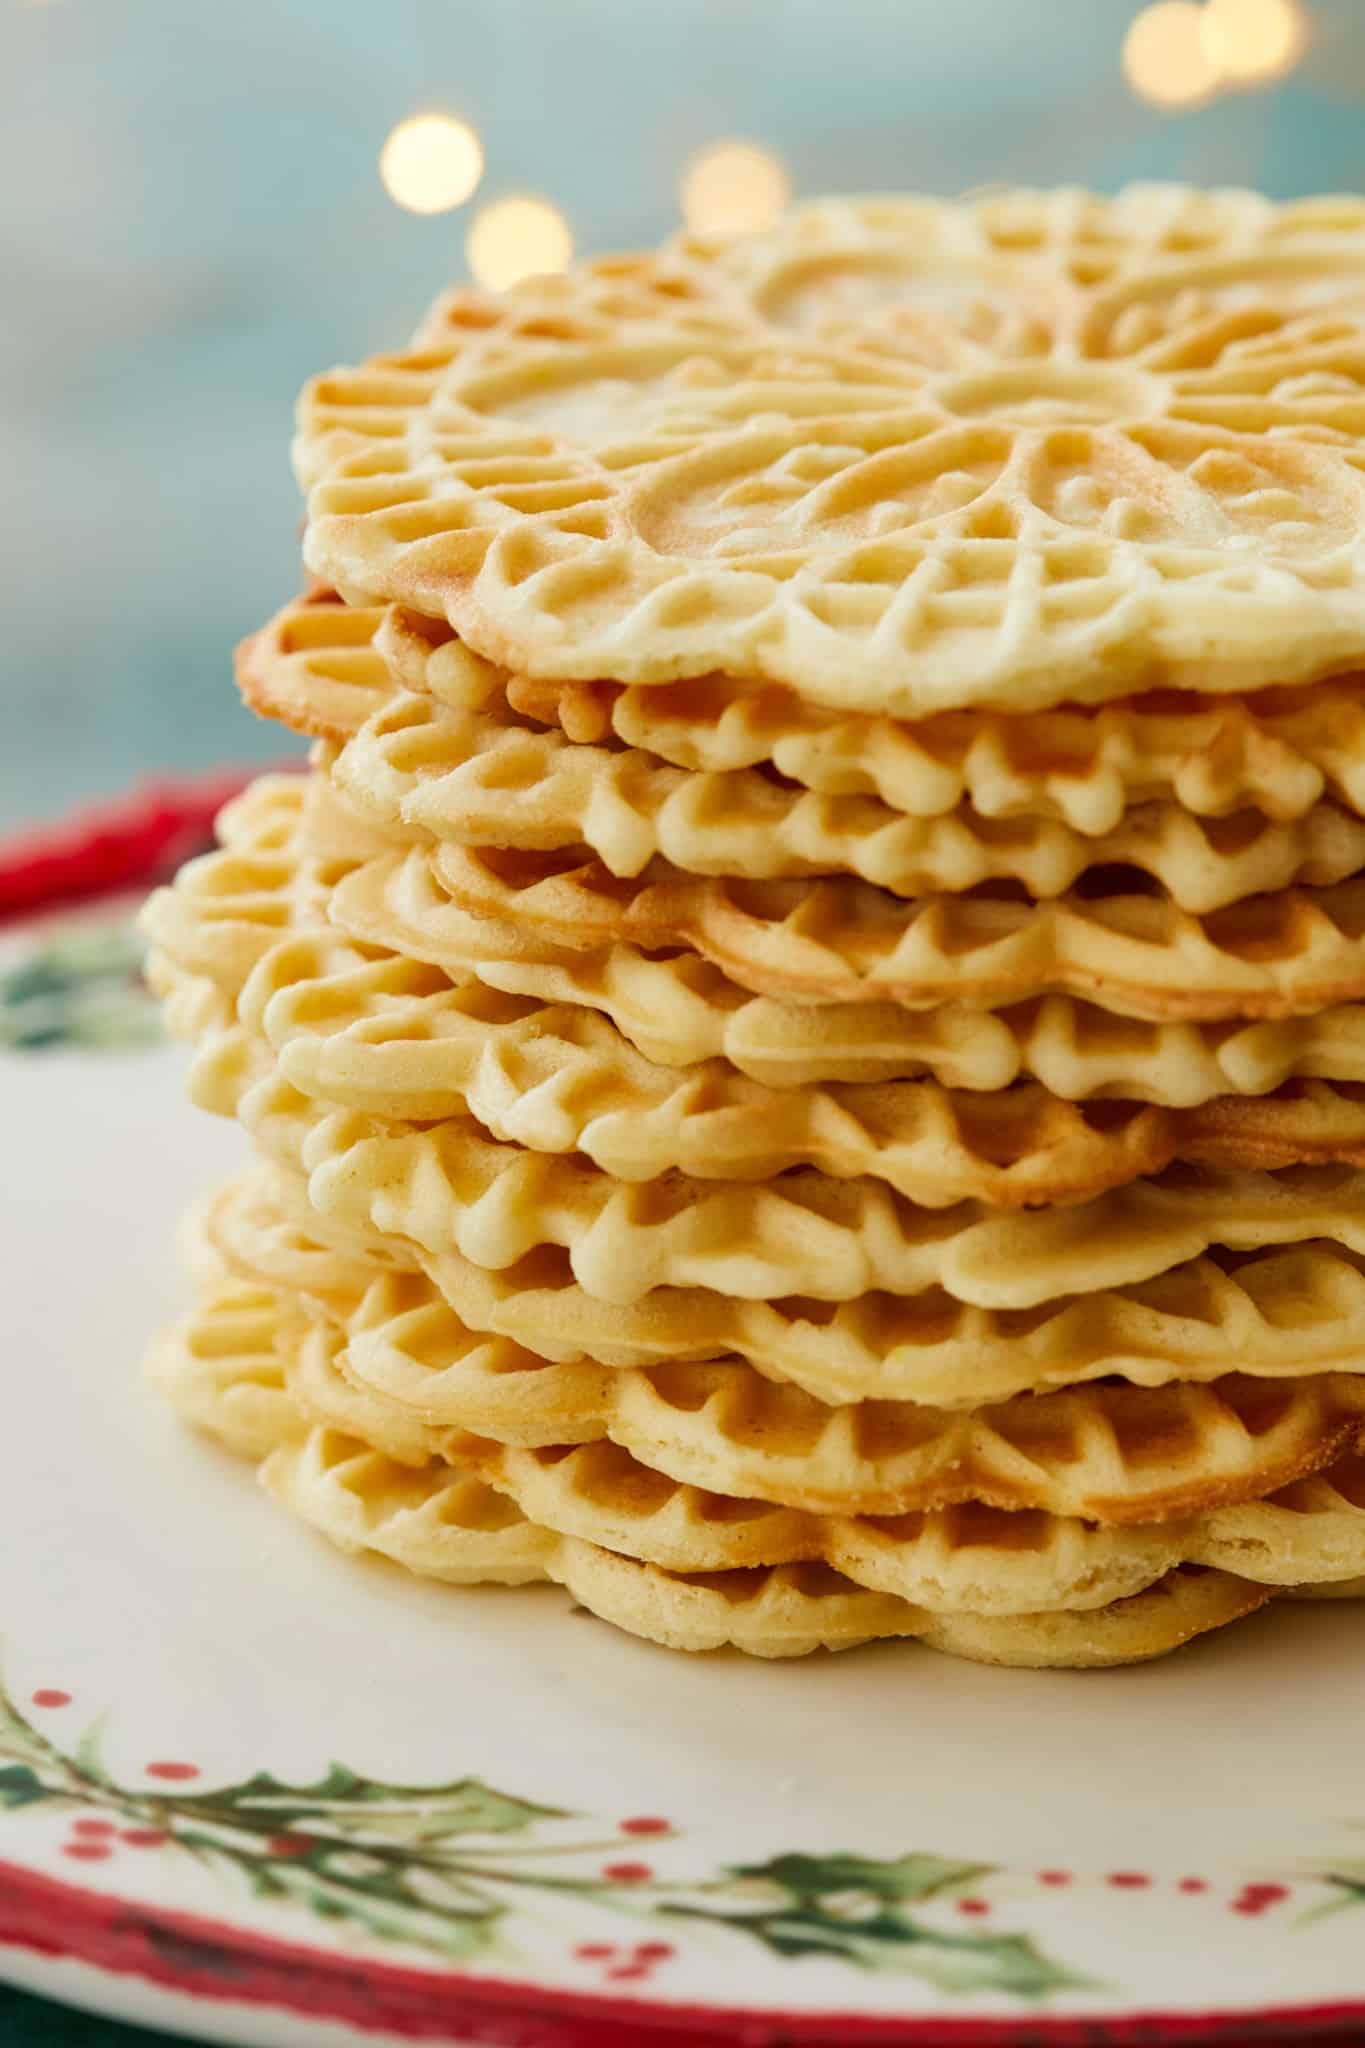 A stack of homemade pizzelle.